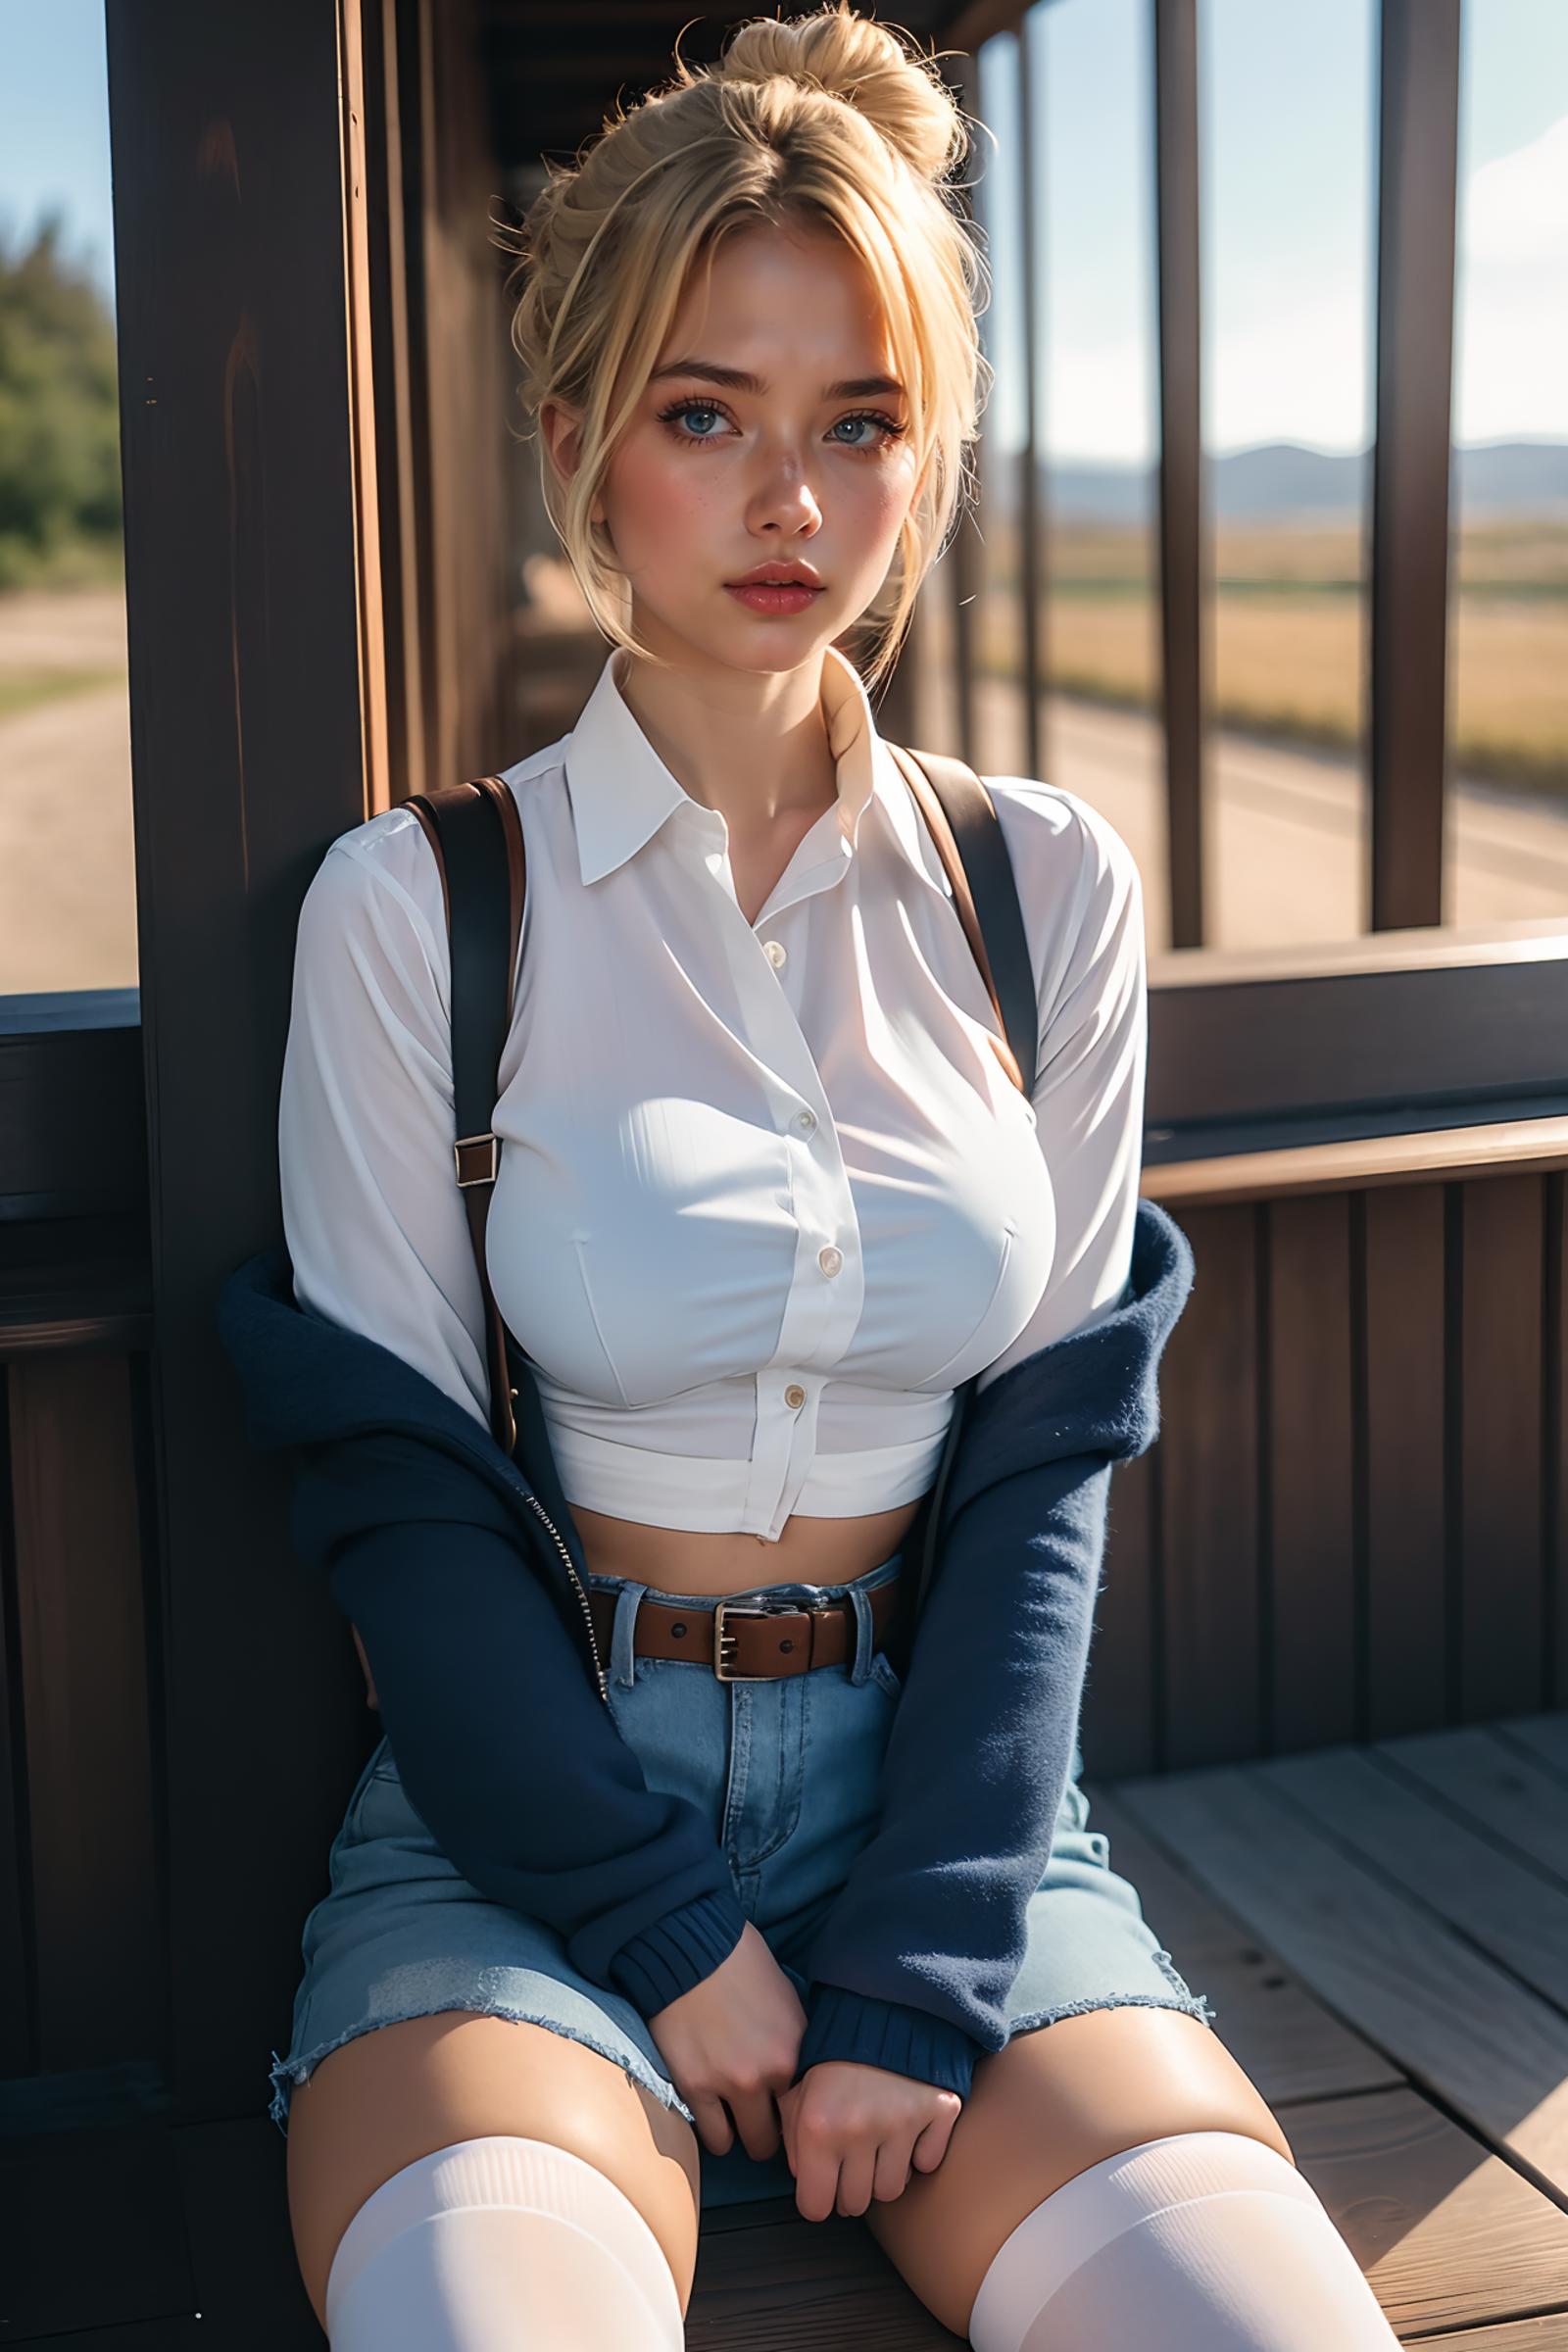 Blonde Woman in White Shirt and Blue Jeans with a Purse on Her Shoulder.